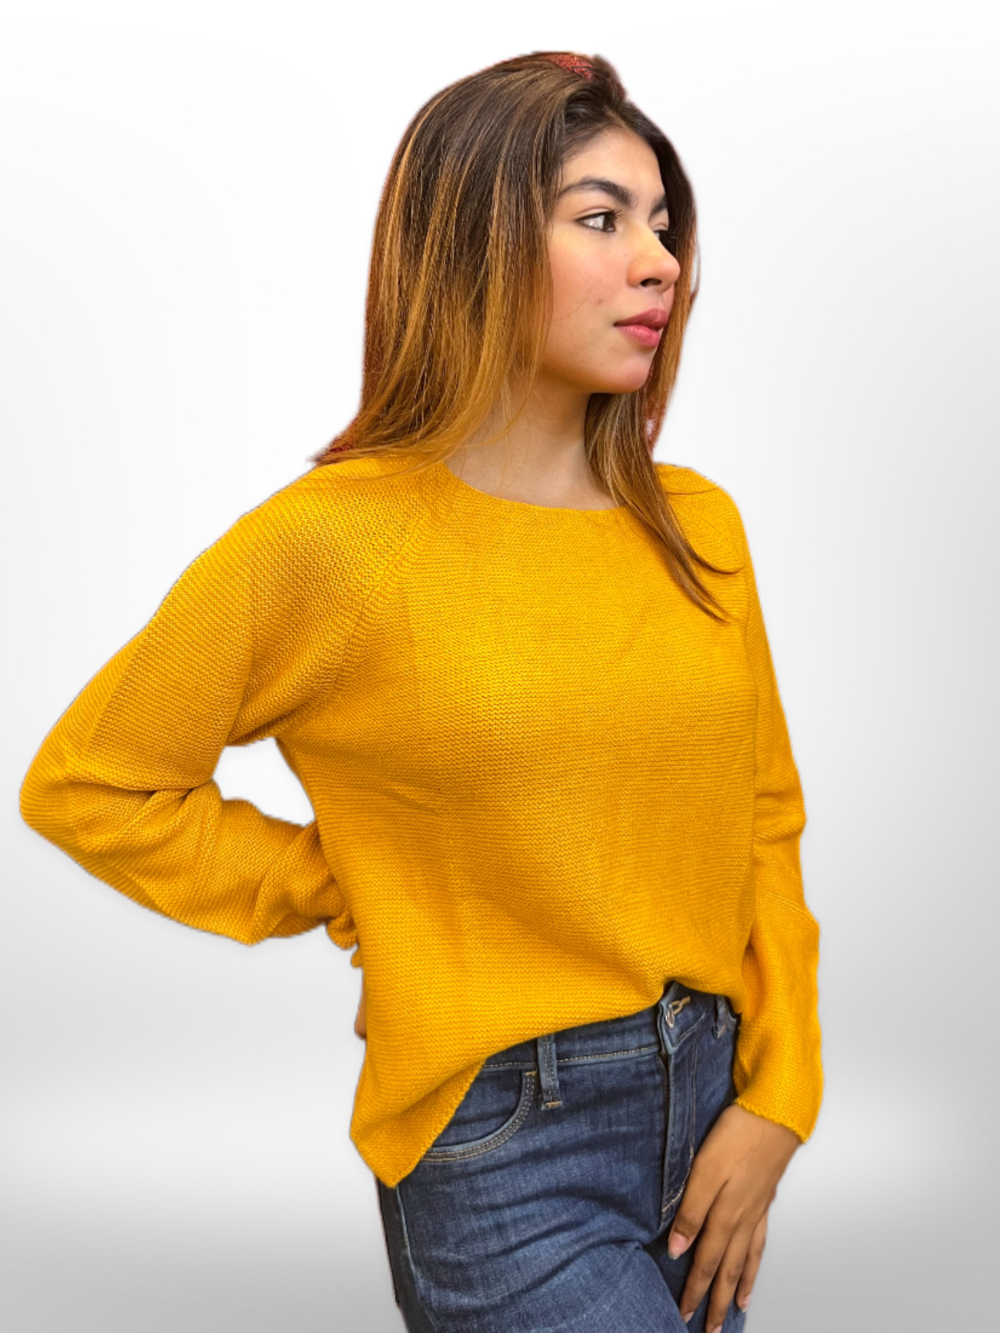 Women's Sweater Yellow - Legacy Boutiques